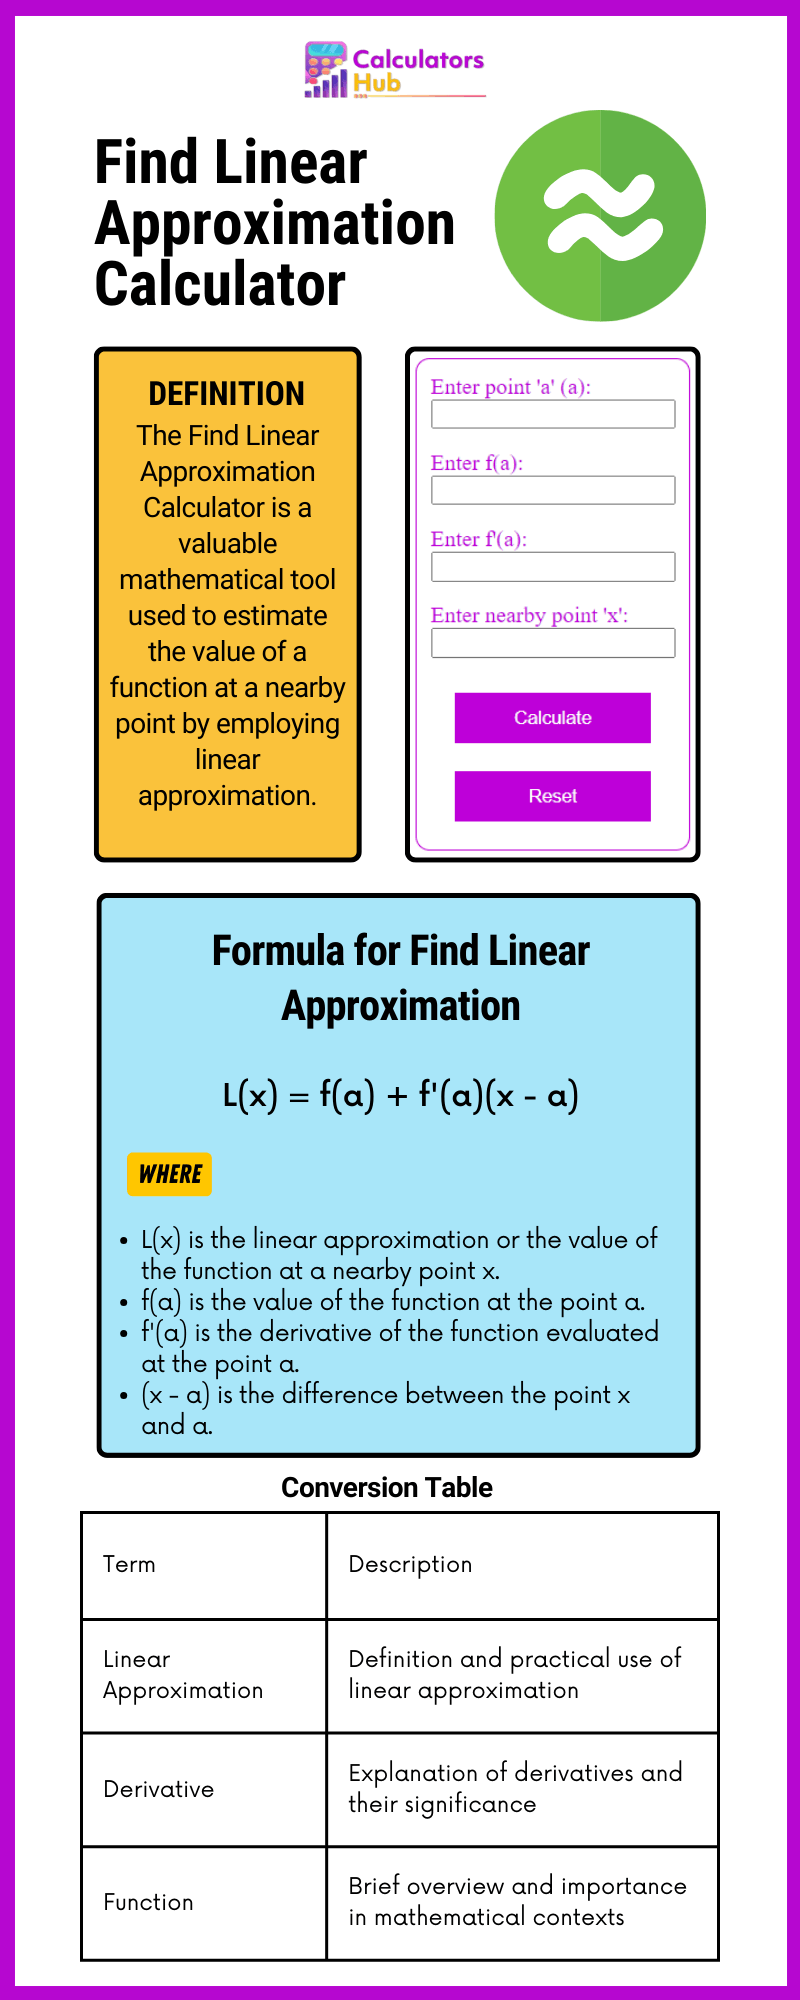 Find Linear Approximation Calculator